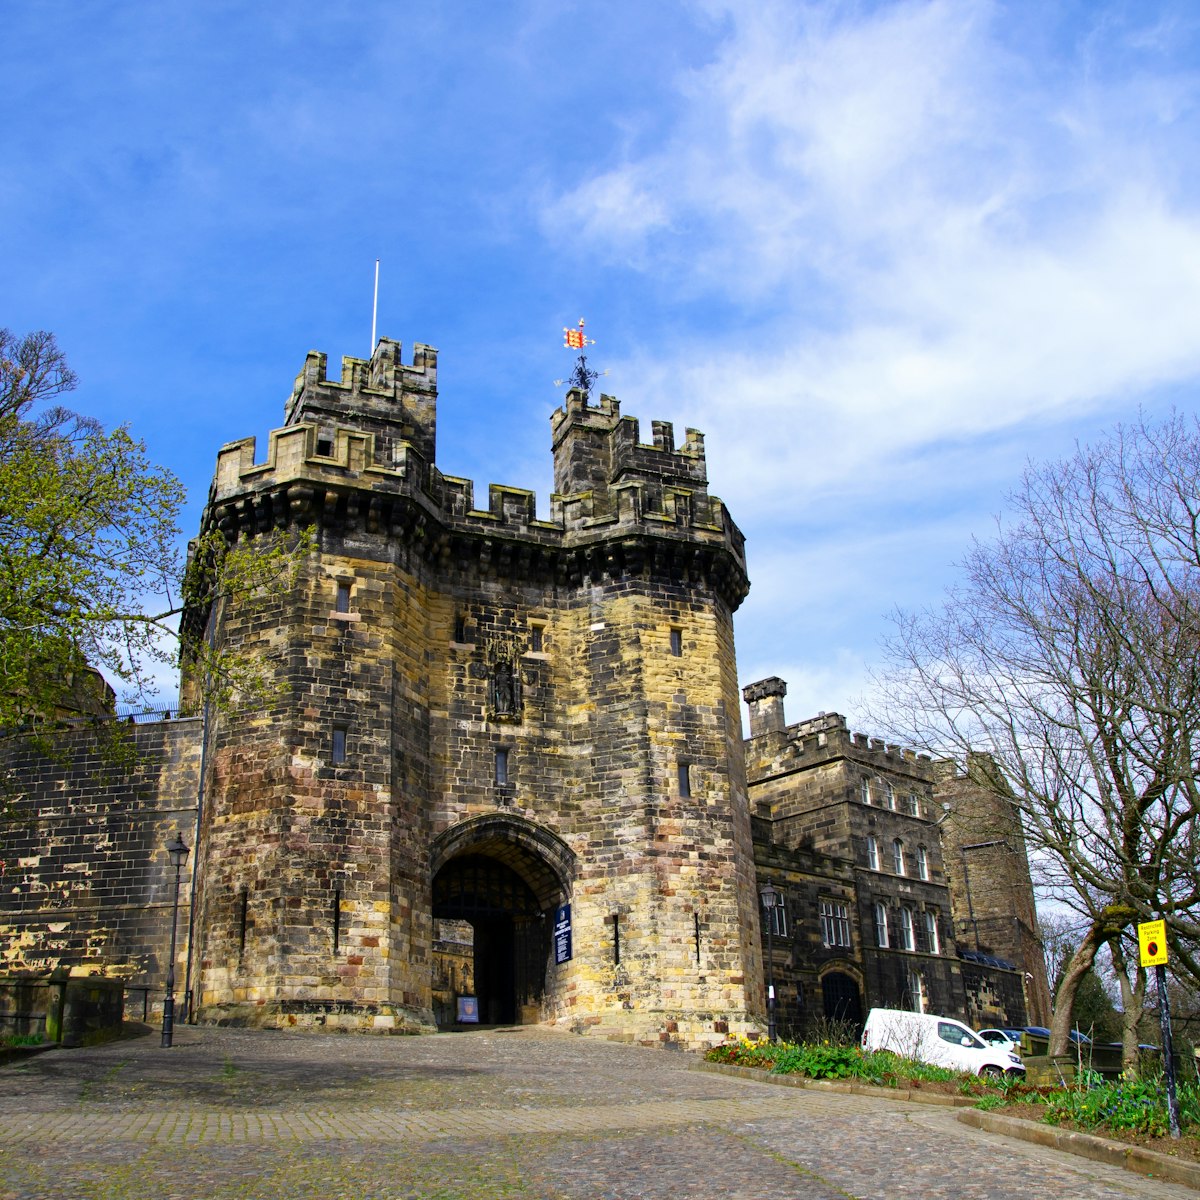 Lancaster Castle is a medieval castle founded in the 11th century on the site of a Roman fort.  Lancaster, Lancashire, England, on Monday, 11th April, 2022.
1392477051